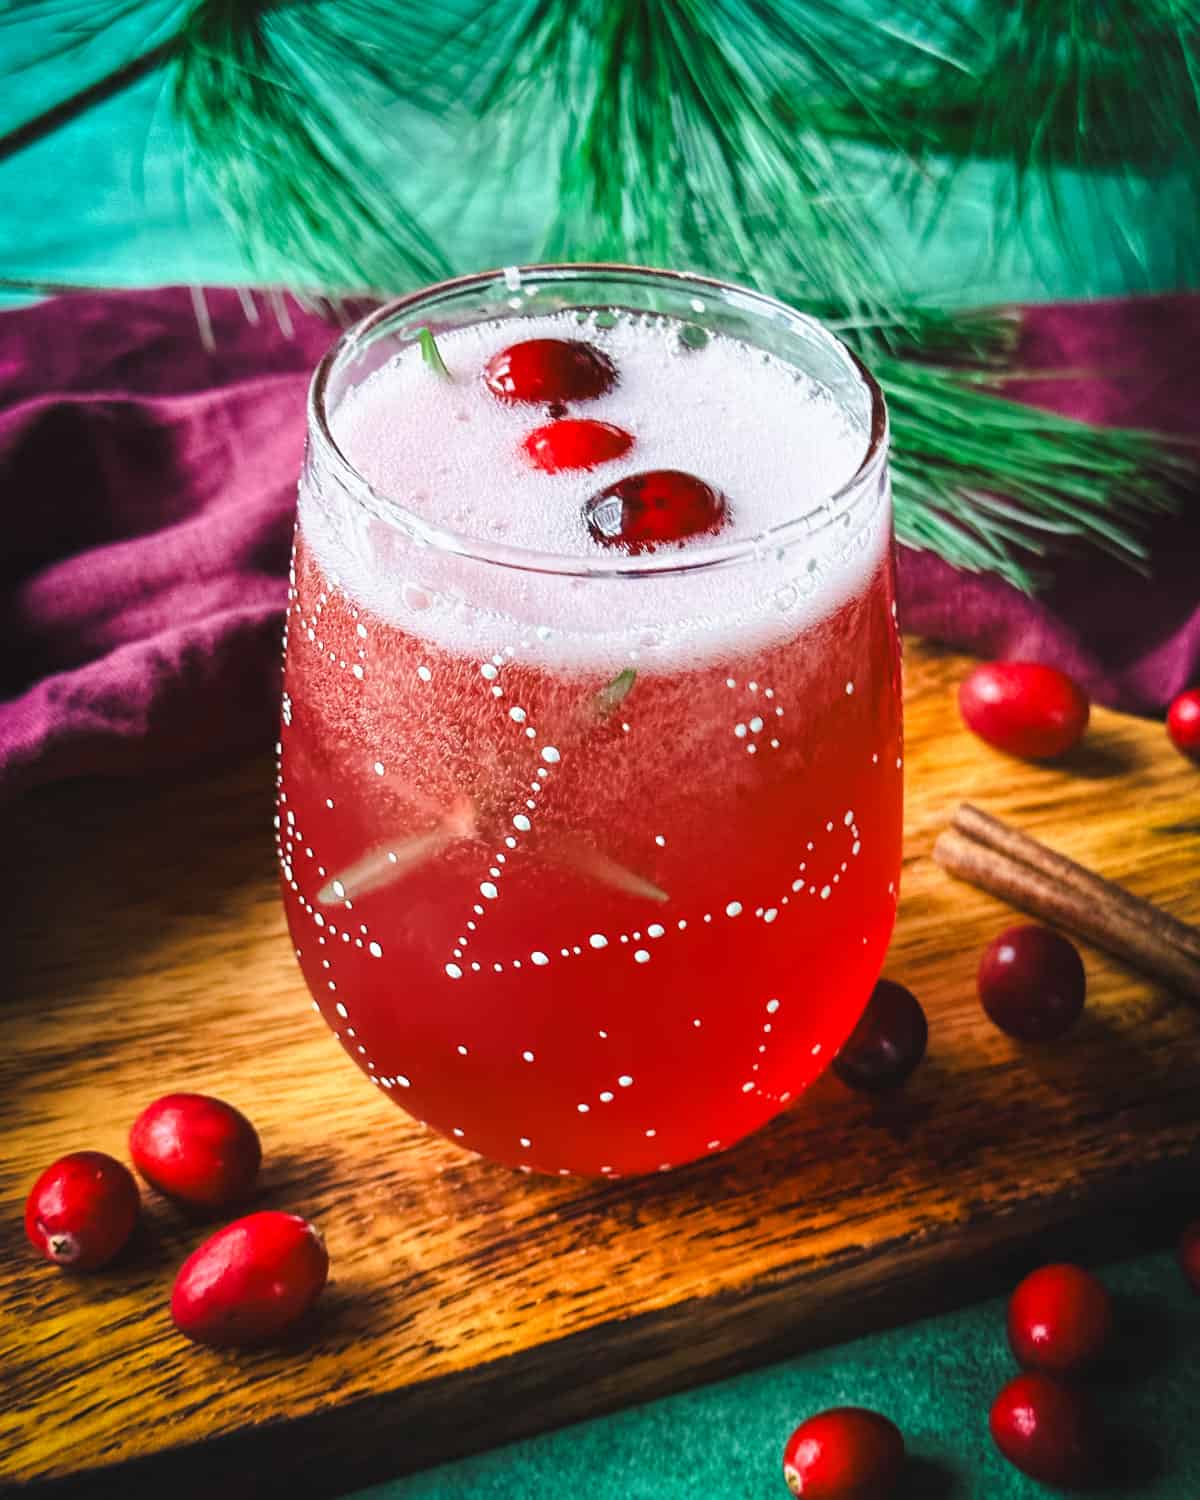 A wine glass with white constellations on it filled with cranberry champagne cocktail and garnished with cranberries and rosemary. On a wood surface, surrounded by fresh cranberries, green and red cloths, and pine.